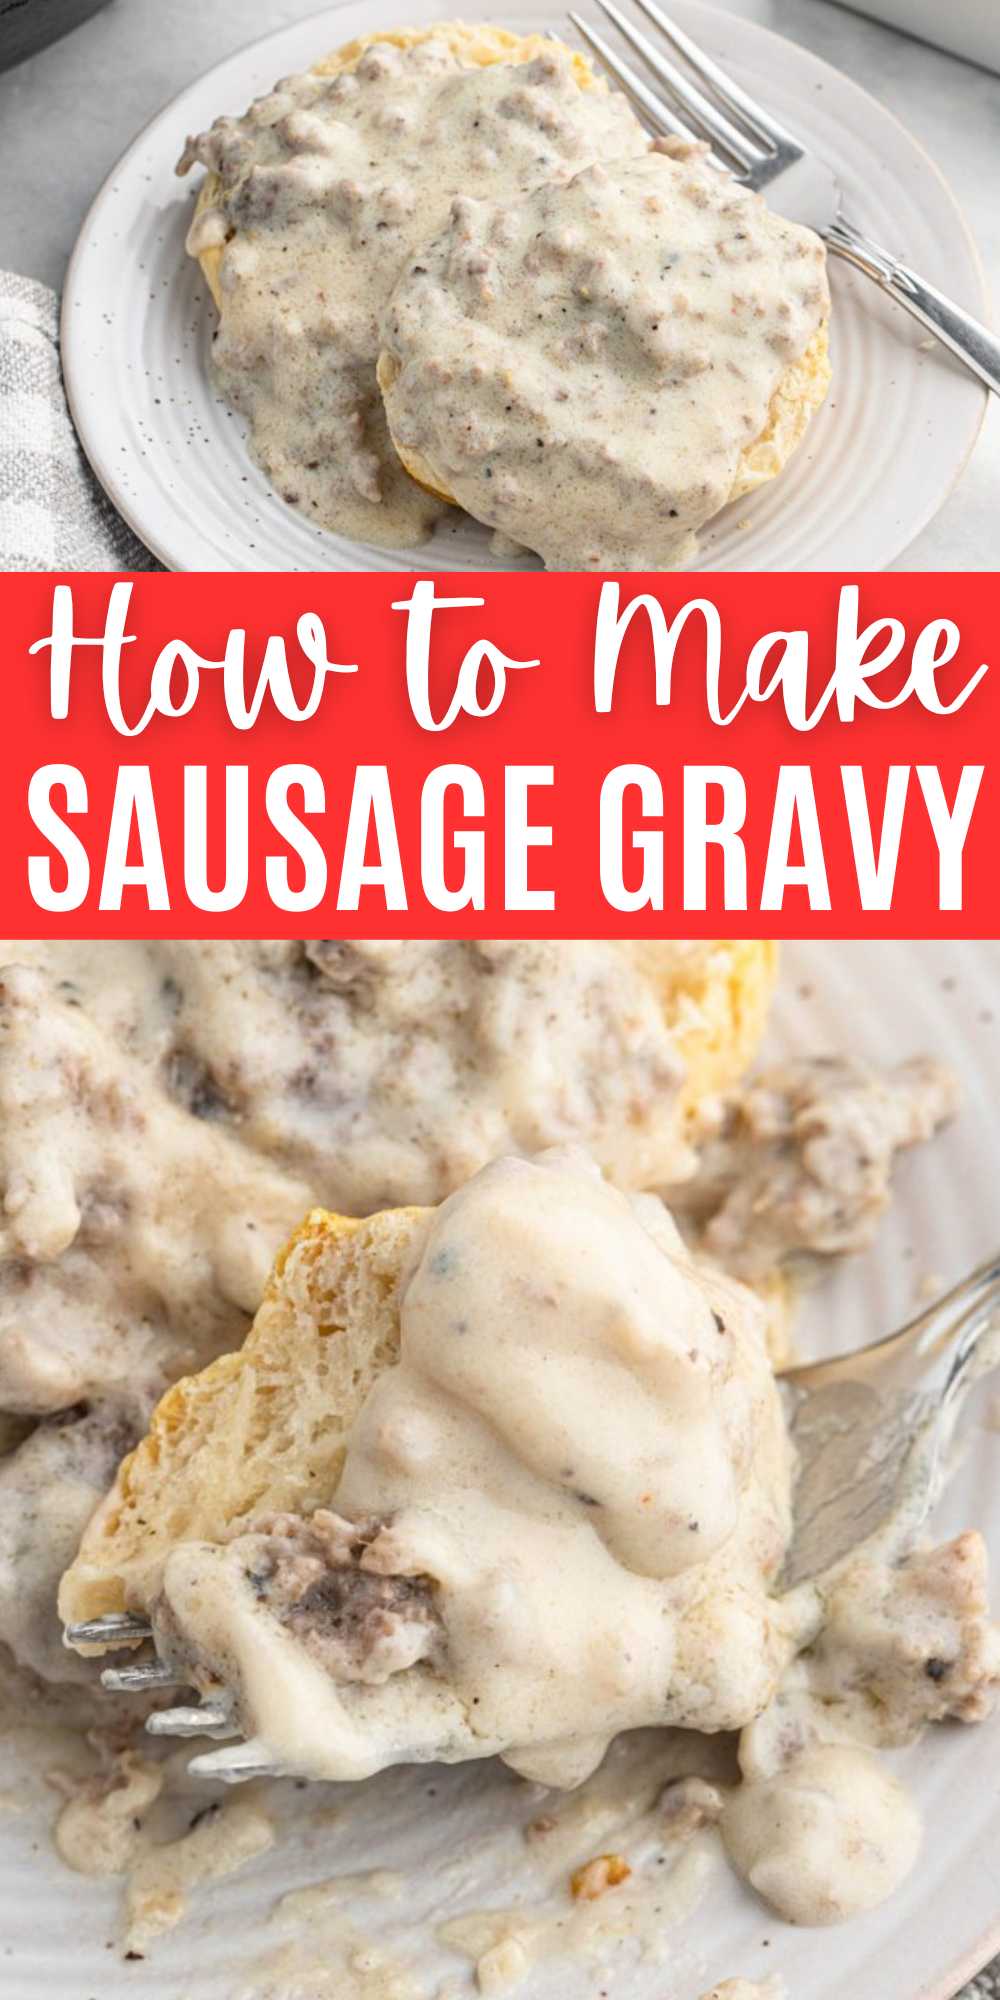 How to Make Sausage Gravy with simple ingredients. This gravy recipe is loaded with flavor and delicious served over homemade biscuits. This sausage gravy recipe is made from scratch and only require a few simple ingredients. If you are looking for an easy Sausage Gravy recipe, this is the one to make. #eatingonadime #howtomakesausagegravy #sausagegravy